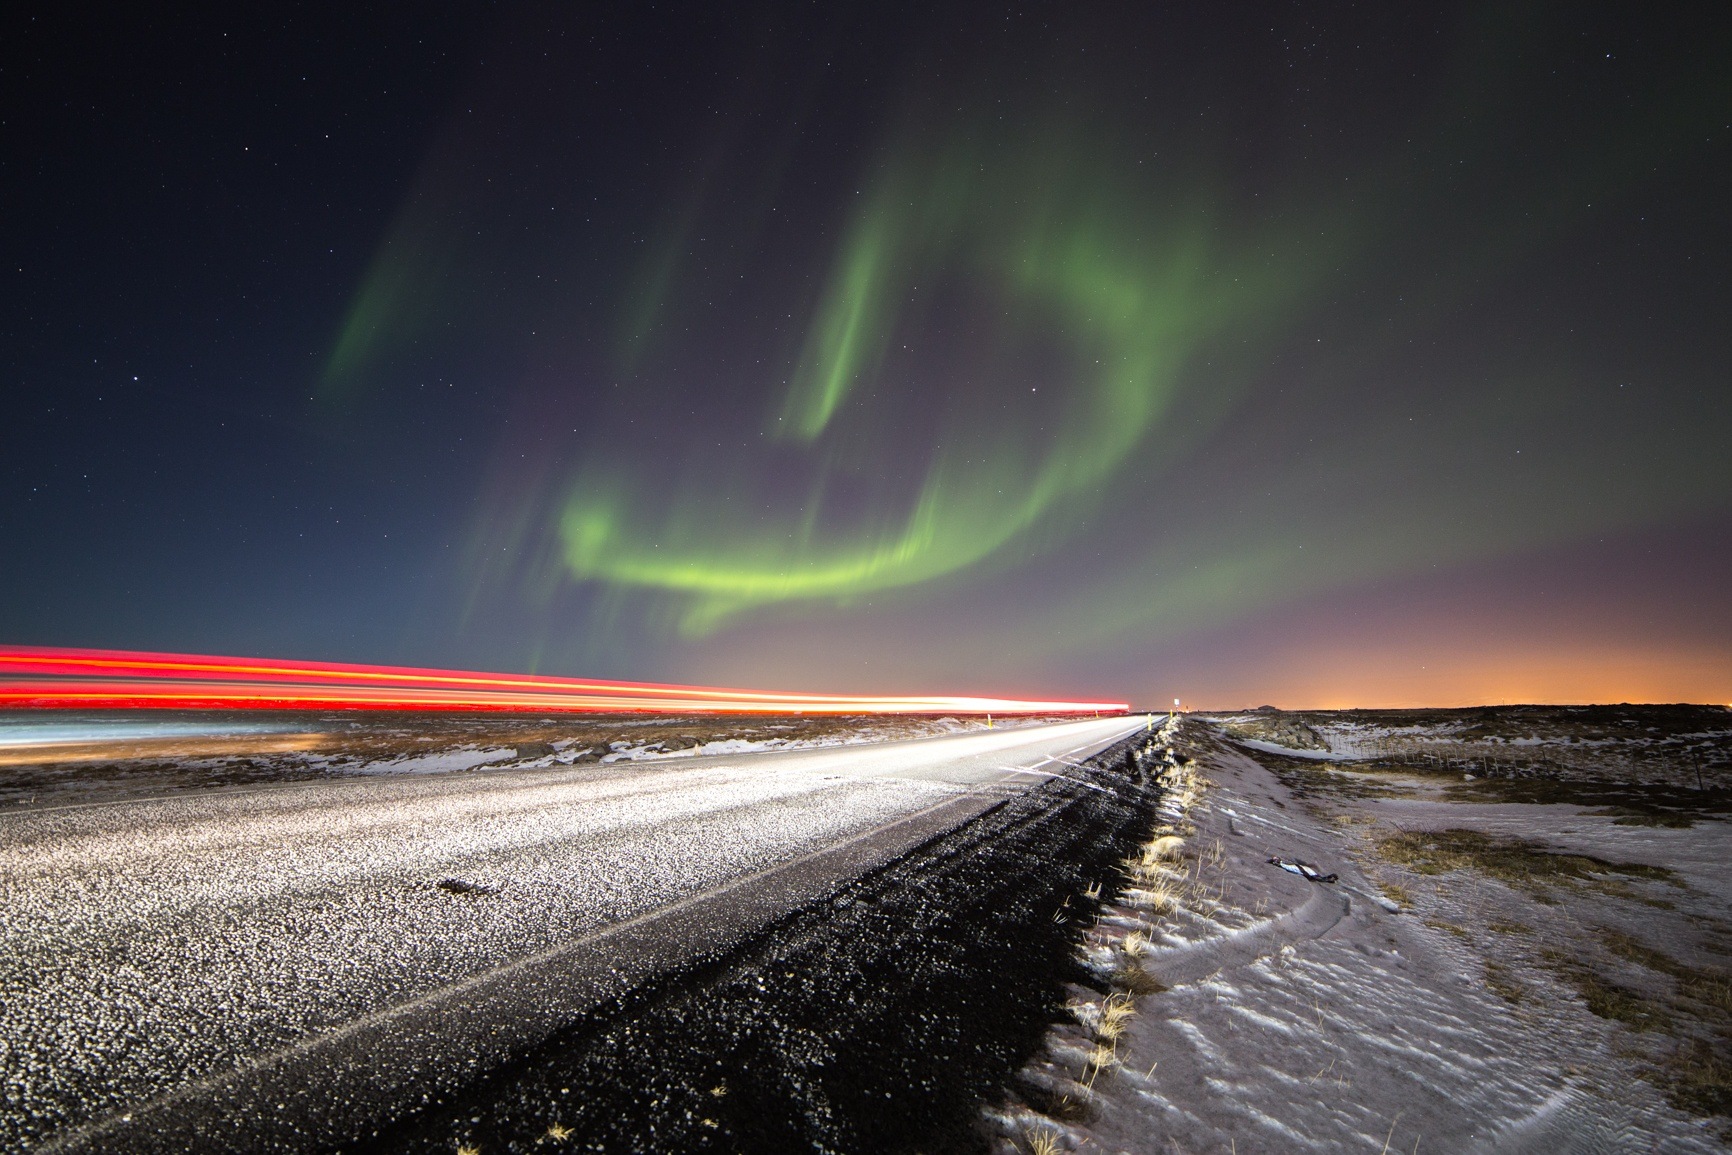 In the winter, find places to visit in Iceland where you'll have a good view of the Northern Lights (photo: David Phan)